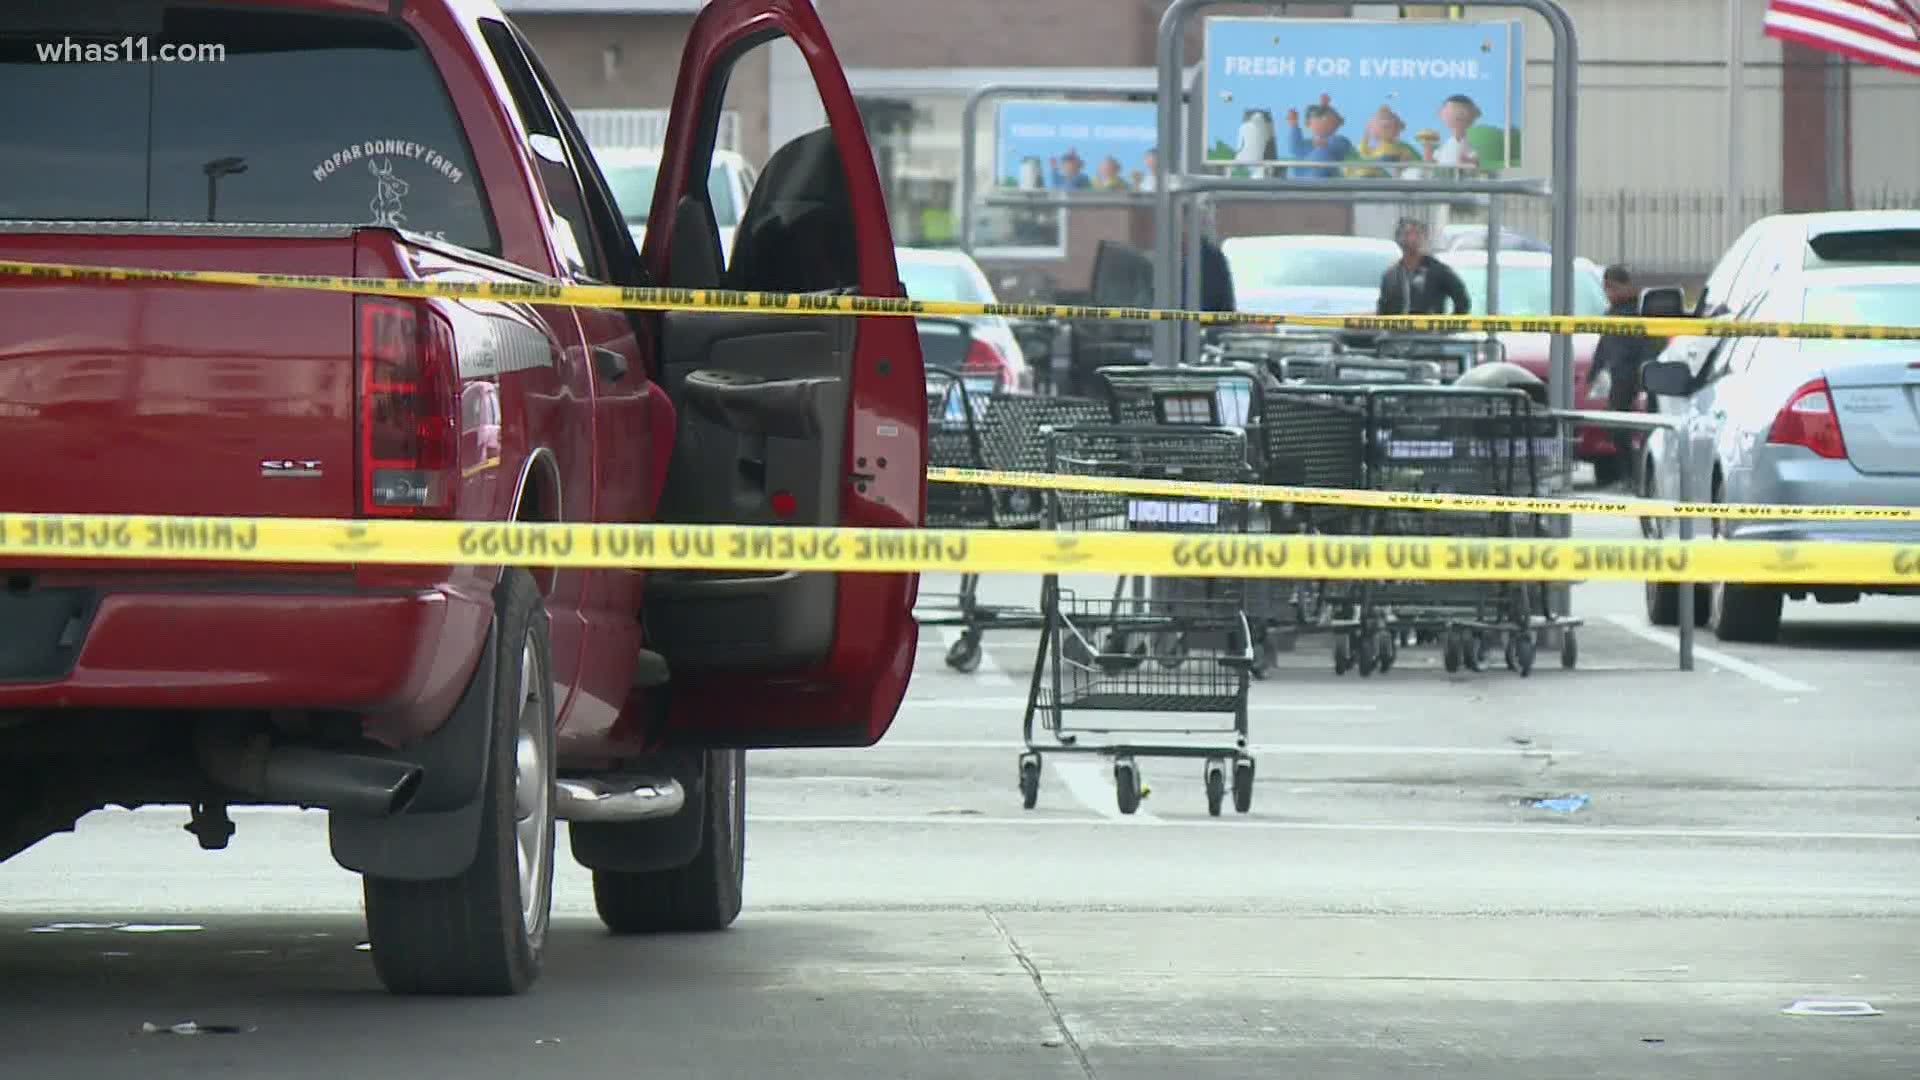 Police in Louisville responded to the shooting around 3:30 p.m. May 24 where the found a man shot in a Kroger parking lot.